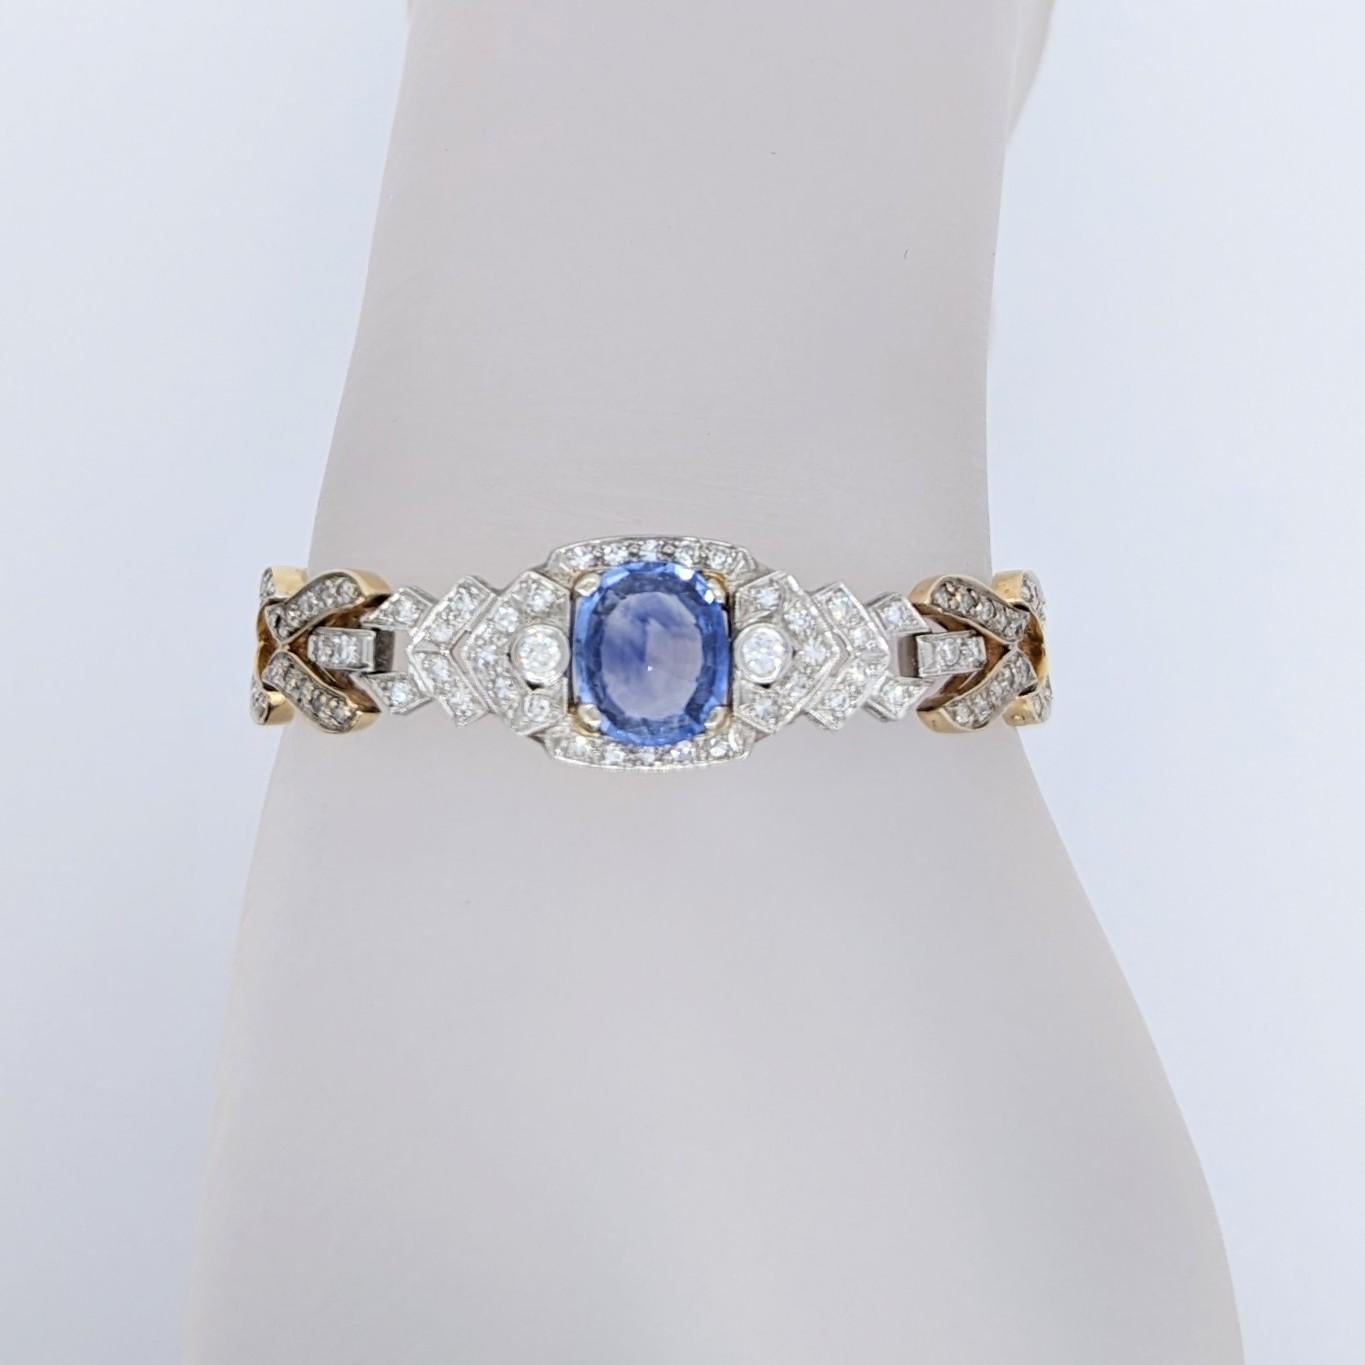 Beautiful big blue sapphire oval with good quality white diamond rounds.  Handmade in 14k yellow and white gold.  Length is 7